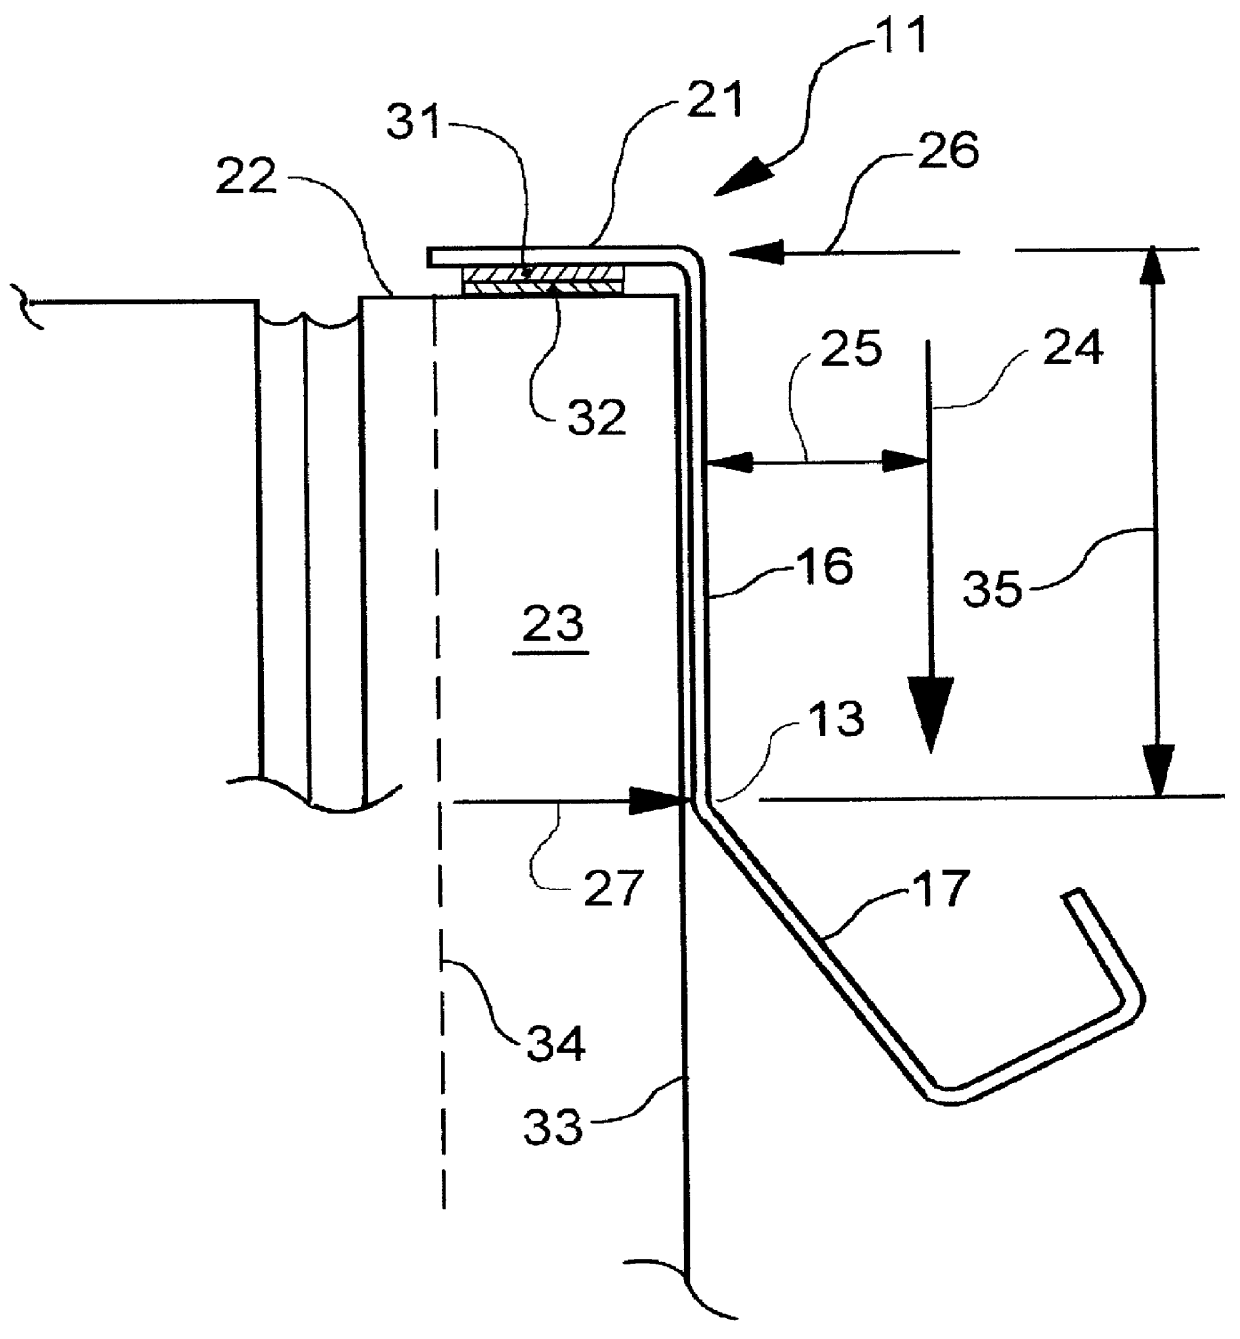 Support hanger for suspending an object directly below a horizontal surface